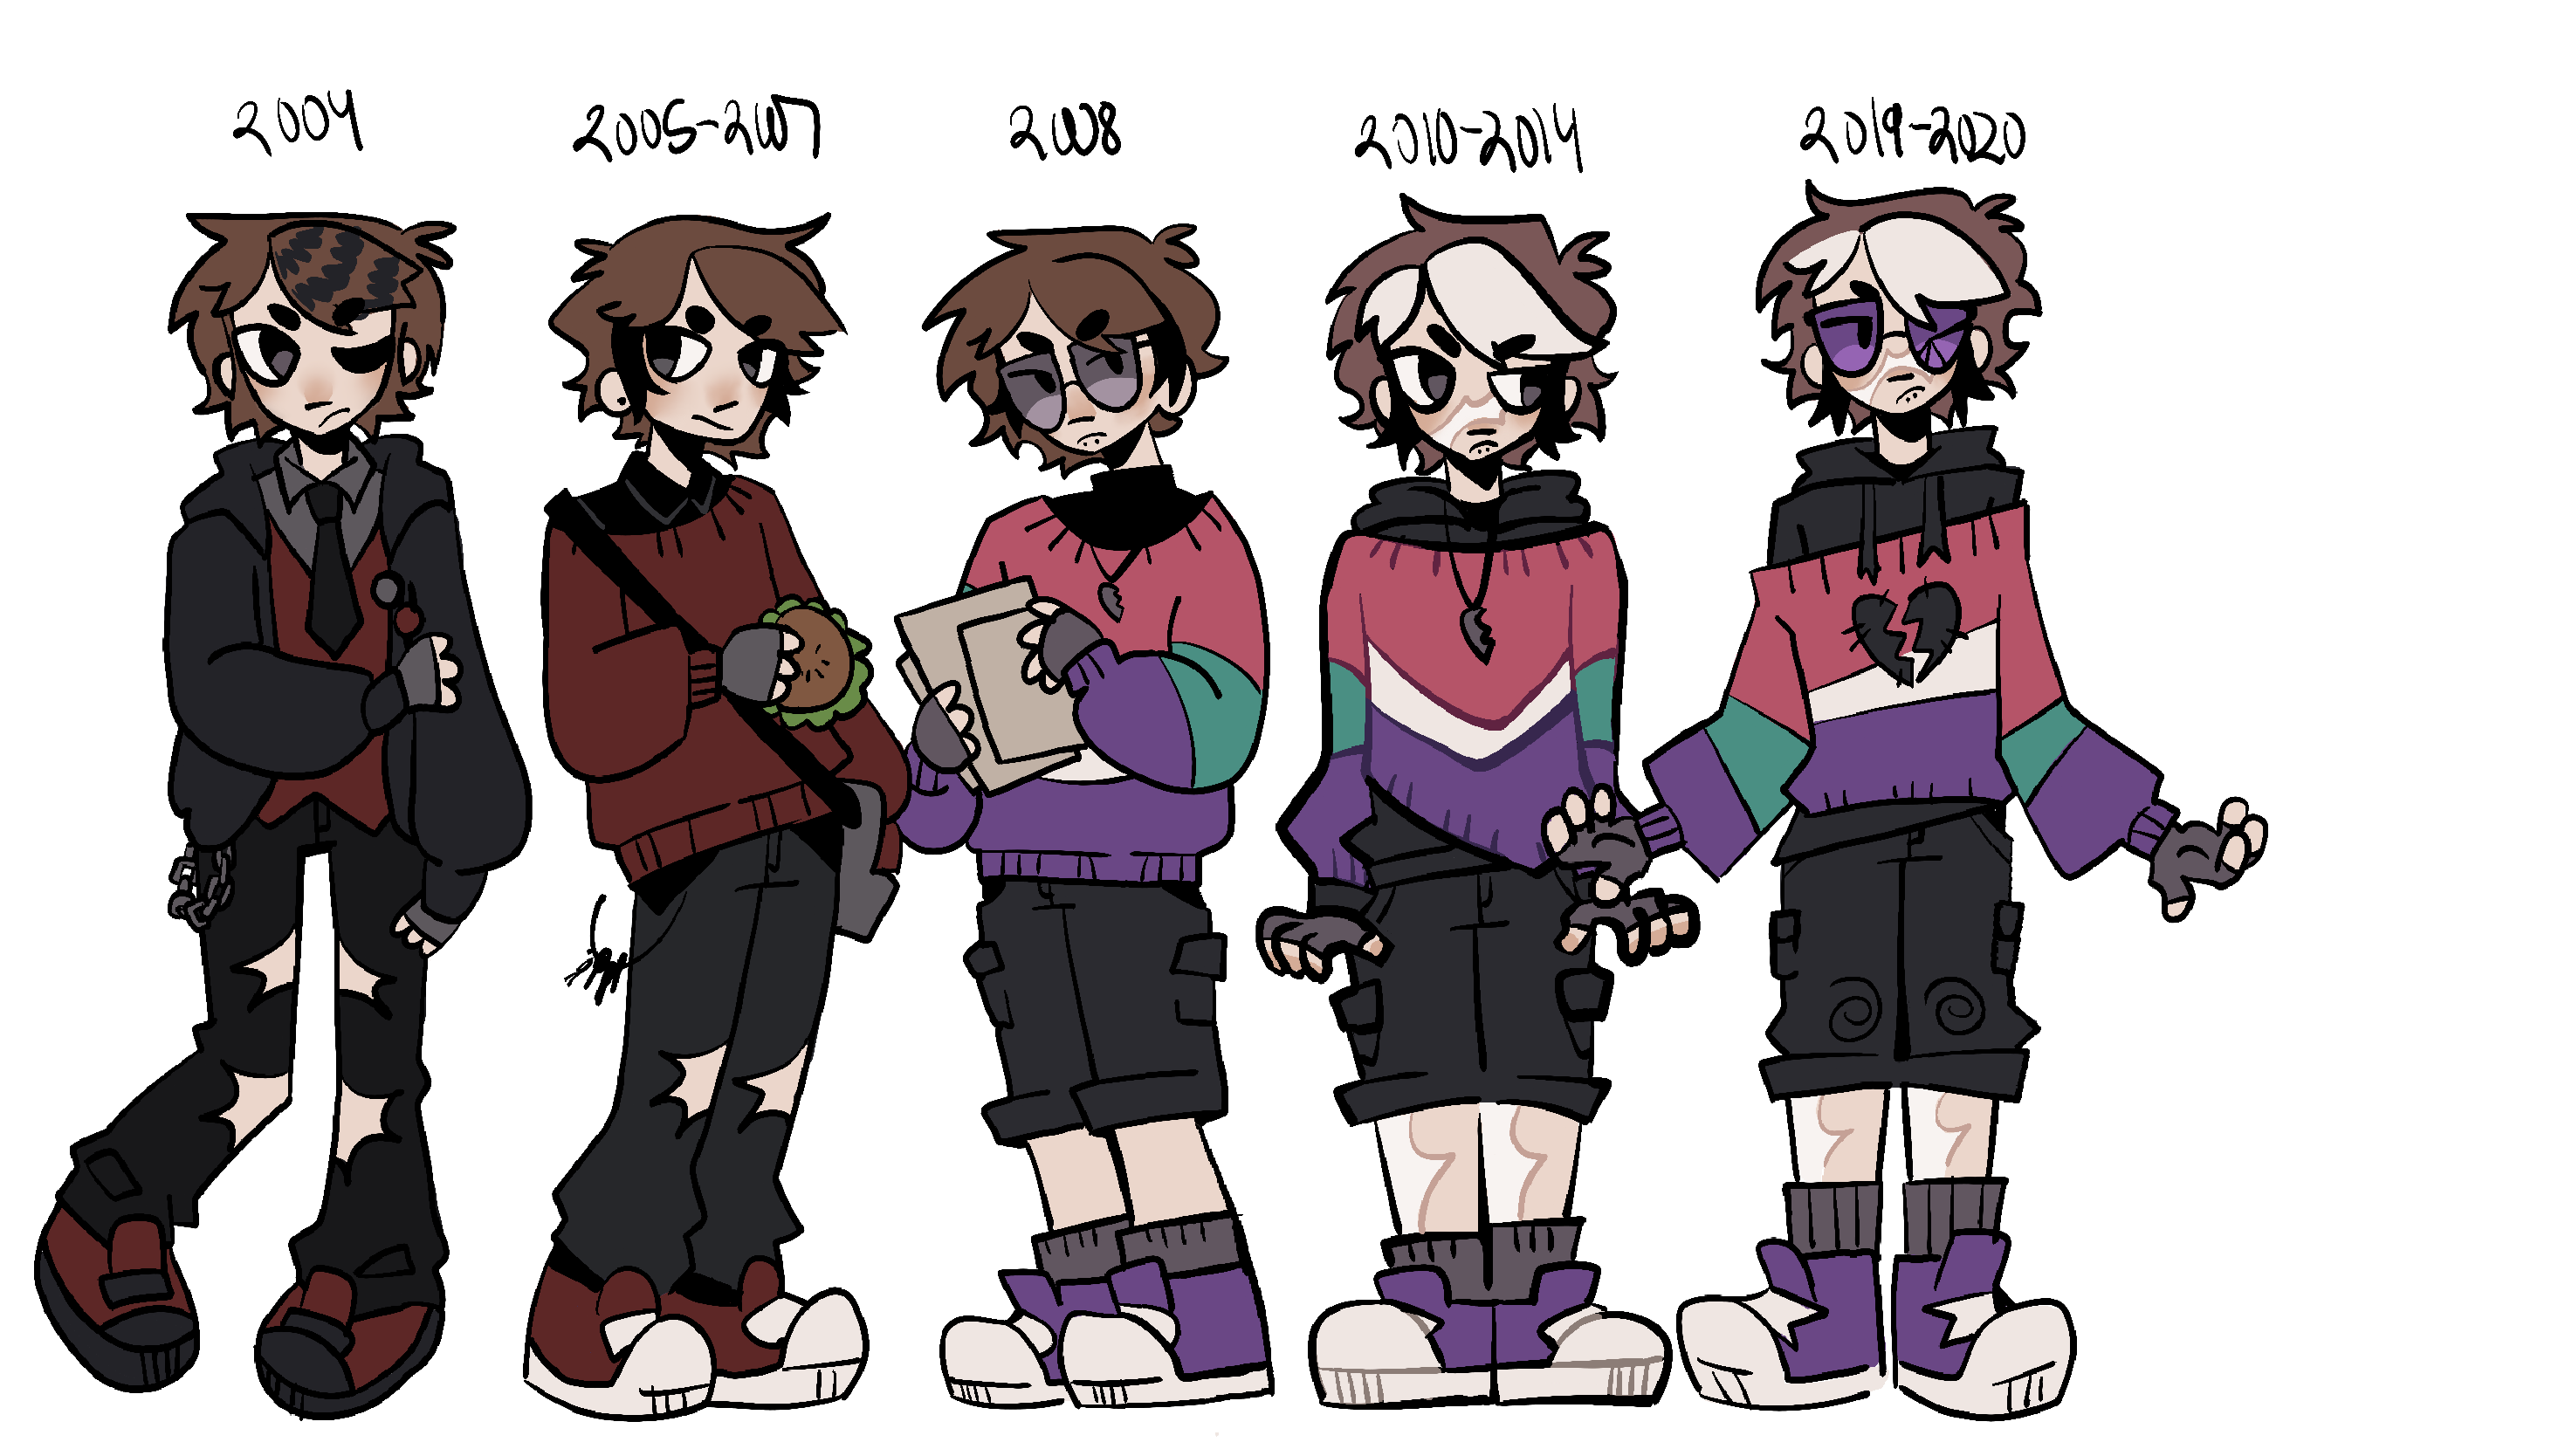 5 designs of tristan throughout the years